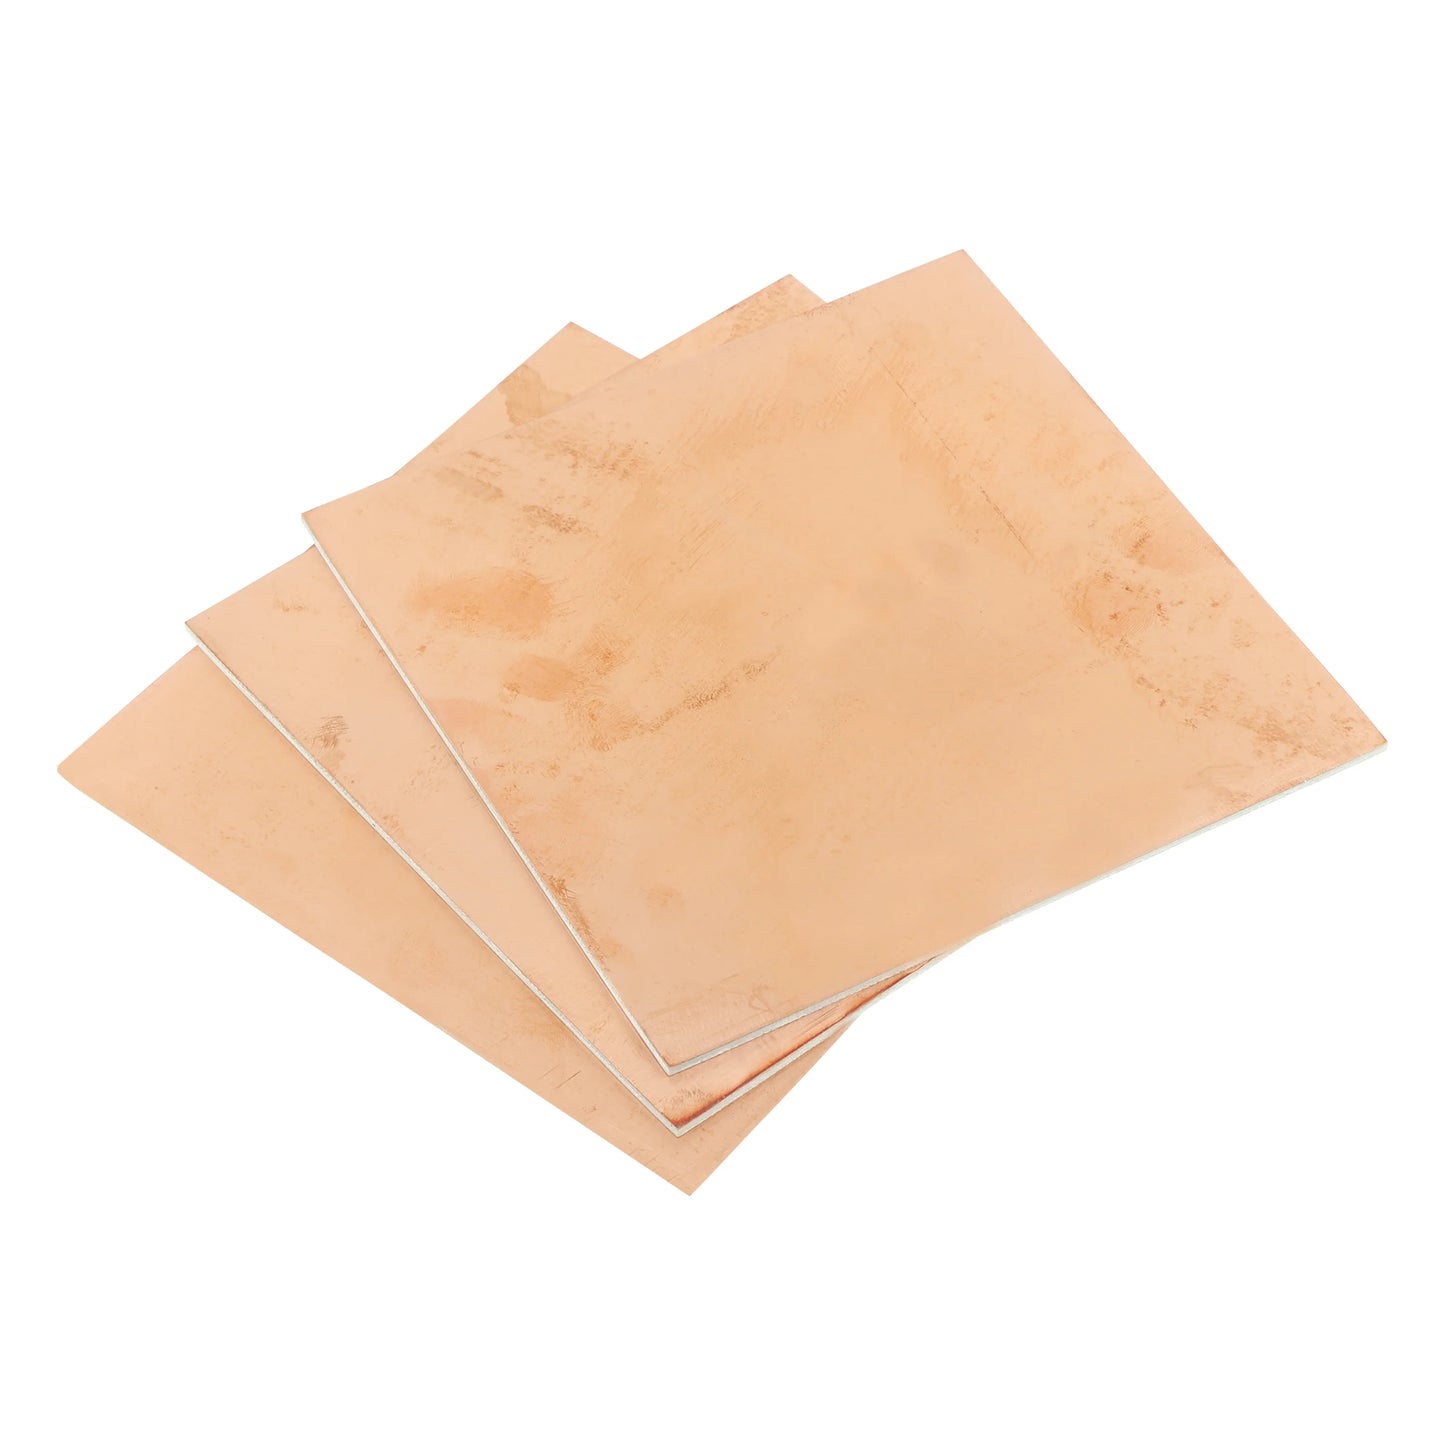 1.6 mm Thick SINGLE Sided Copper Clad Laminate Circuit Board 10 x 10 Inch (FR4 Glass Epoxy PCB) - 2 Units